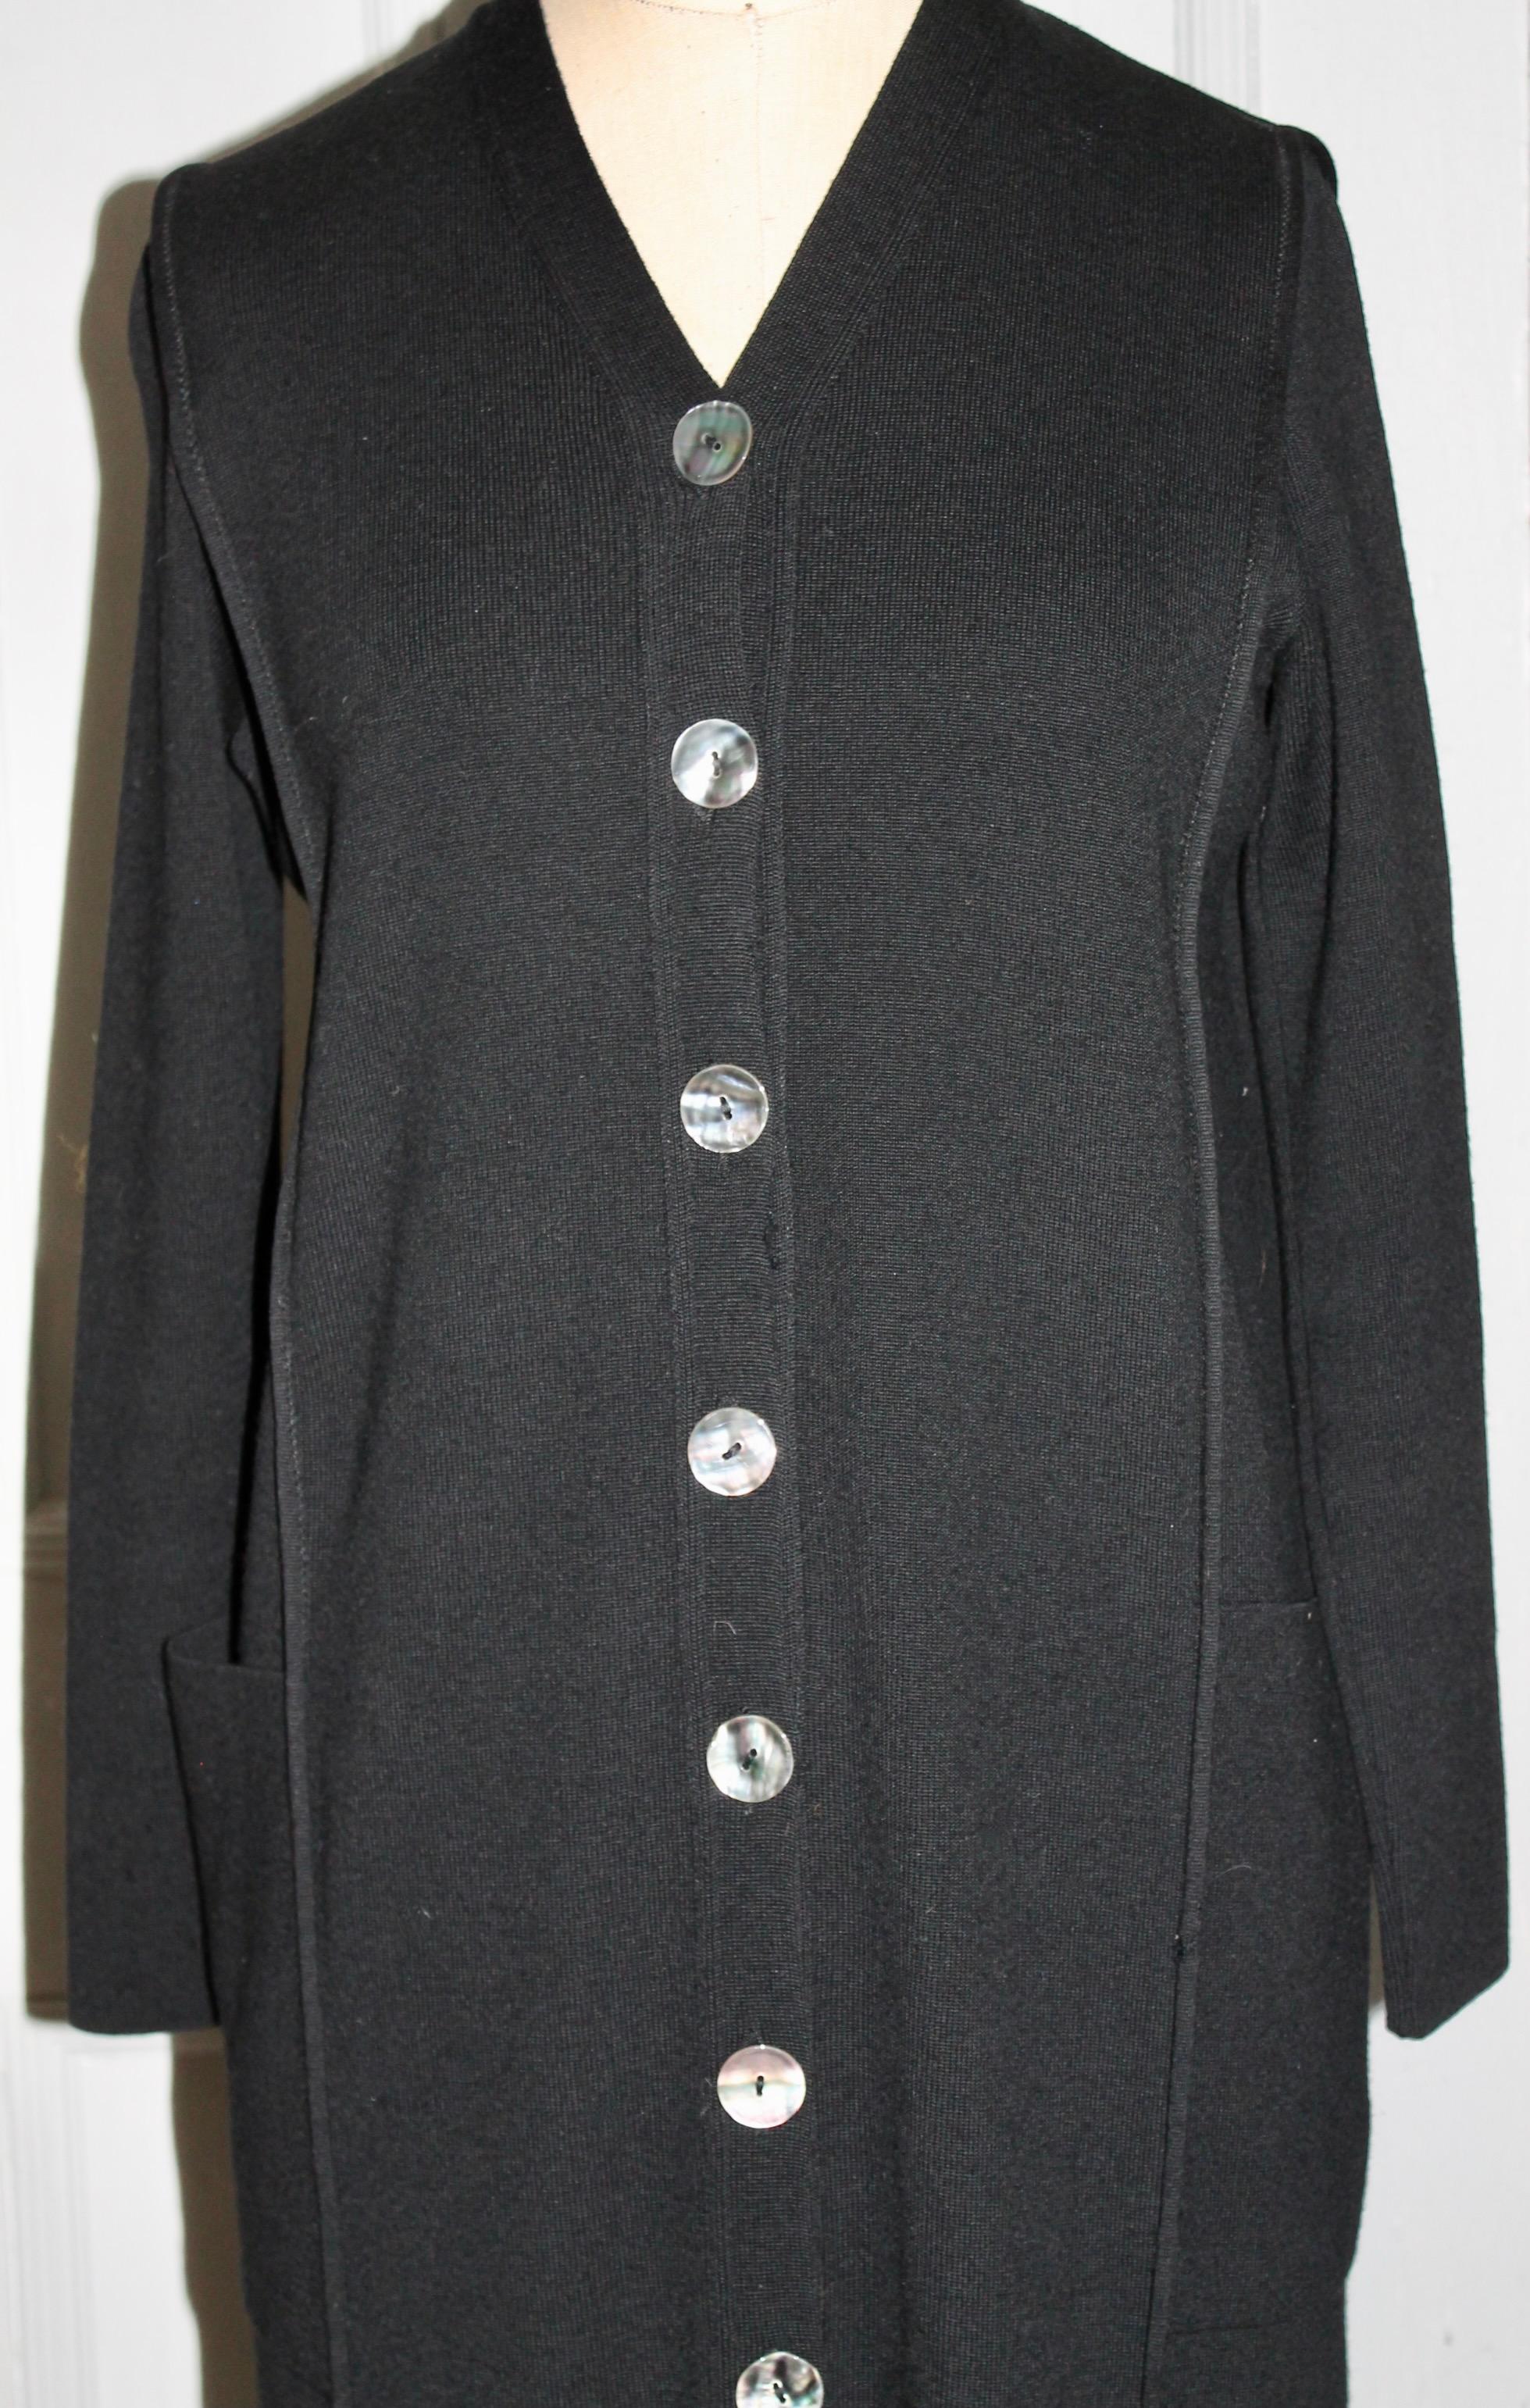 A long black 100% wool day dress. Long sleeves and white buttons down the front with two front pockets.
Size: medium.